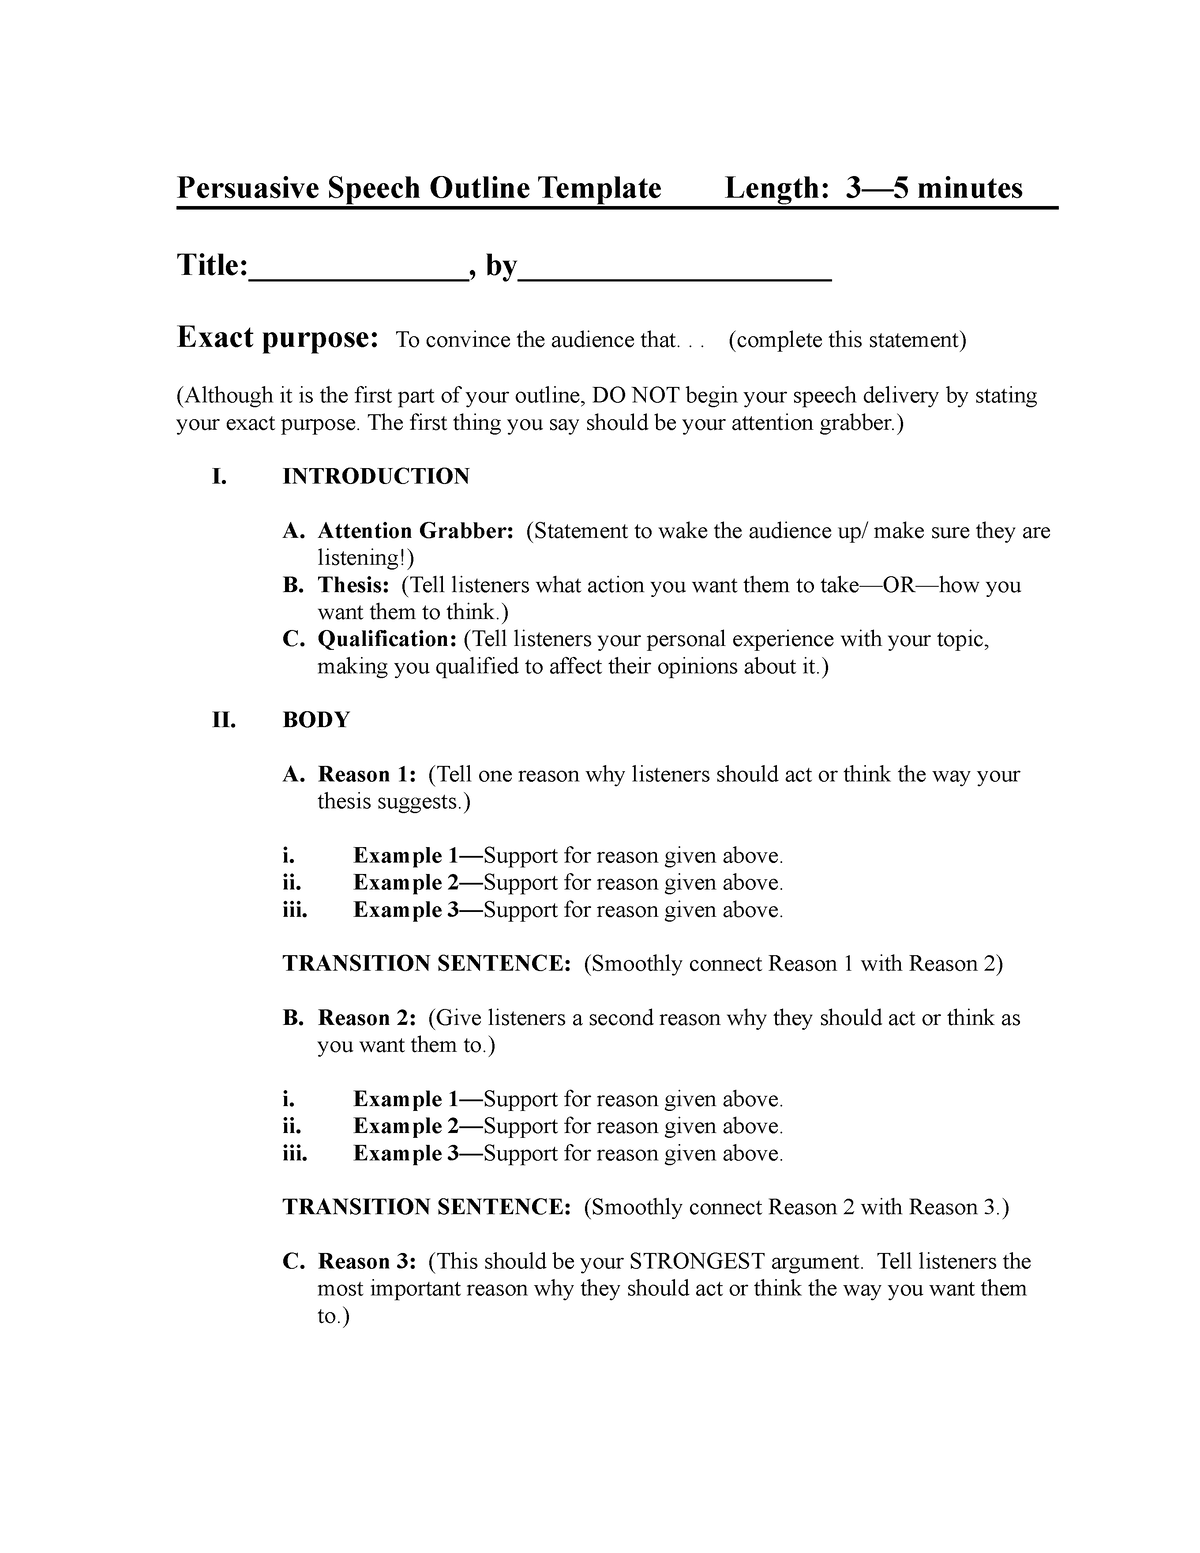 Persuasive Speech Outline - .. (complete this statement) (Although it ...